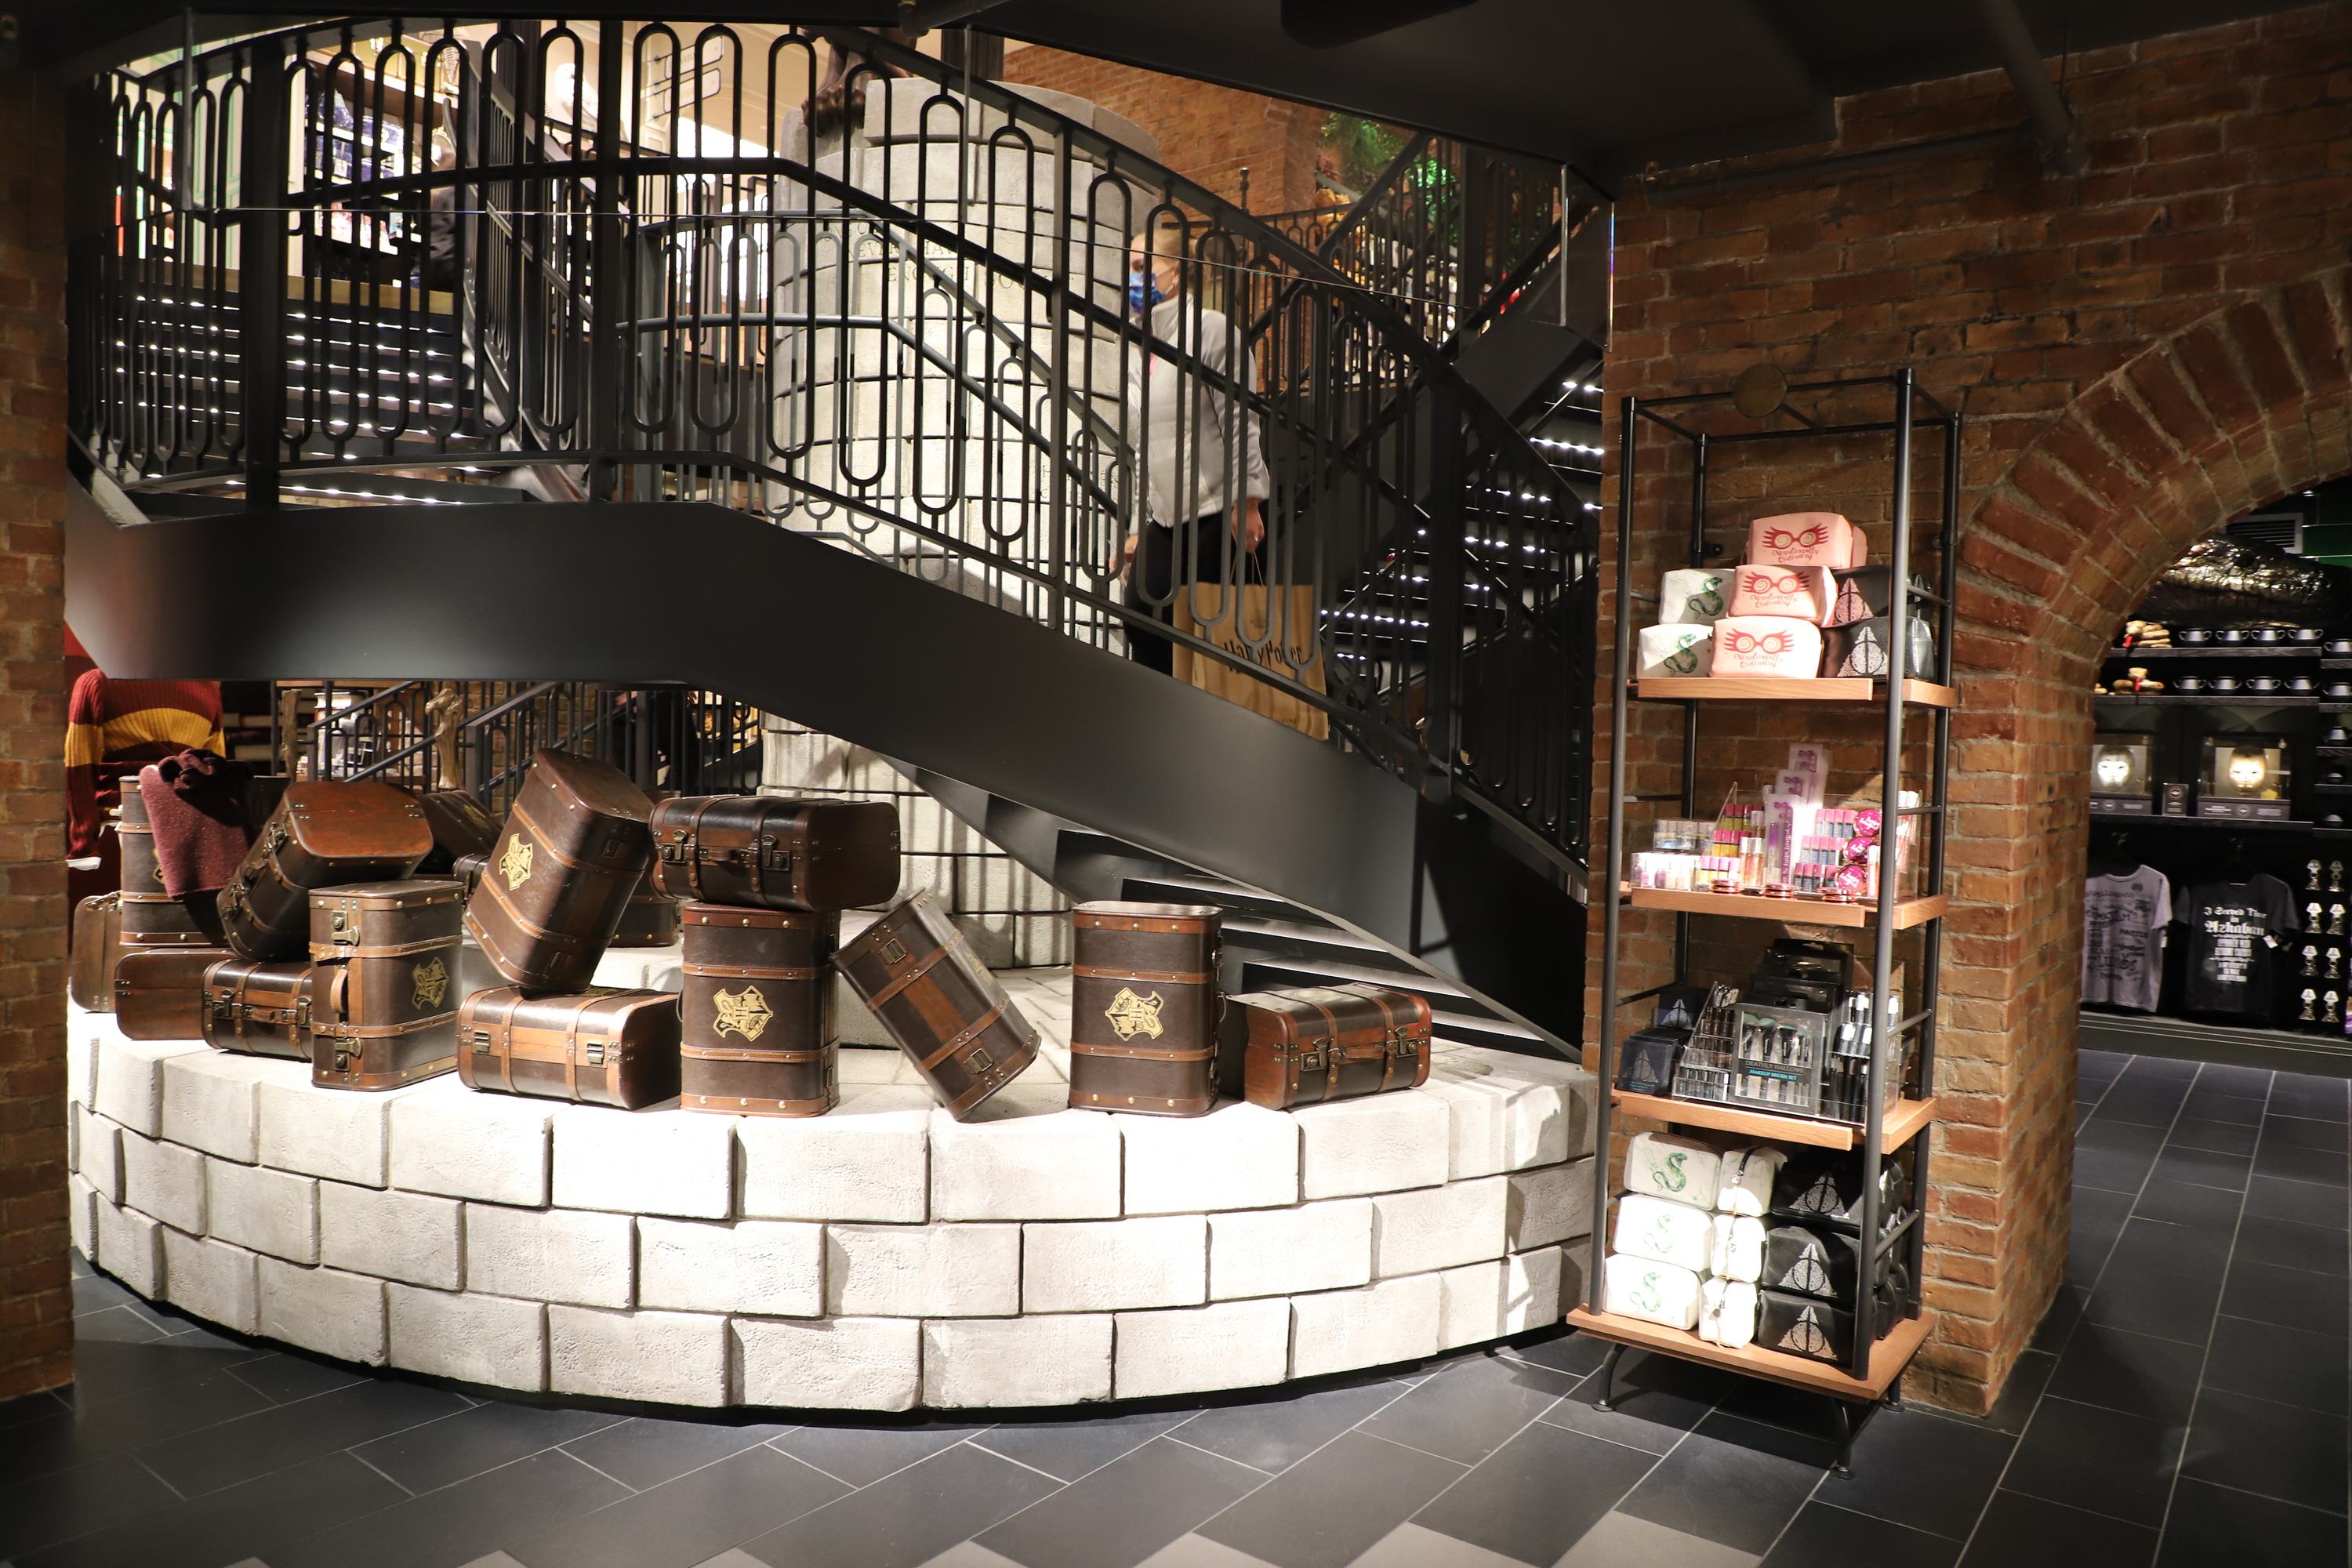 Photos: Inside Biggest 'Harry Potter' Store in the World + Review